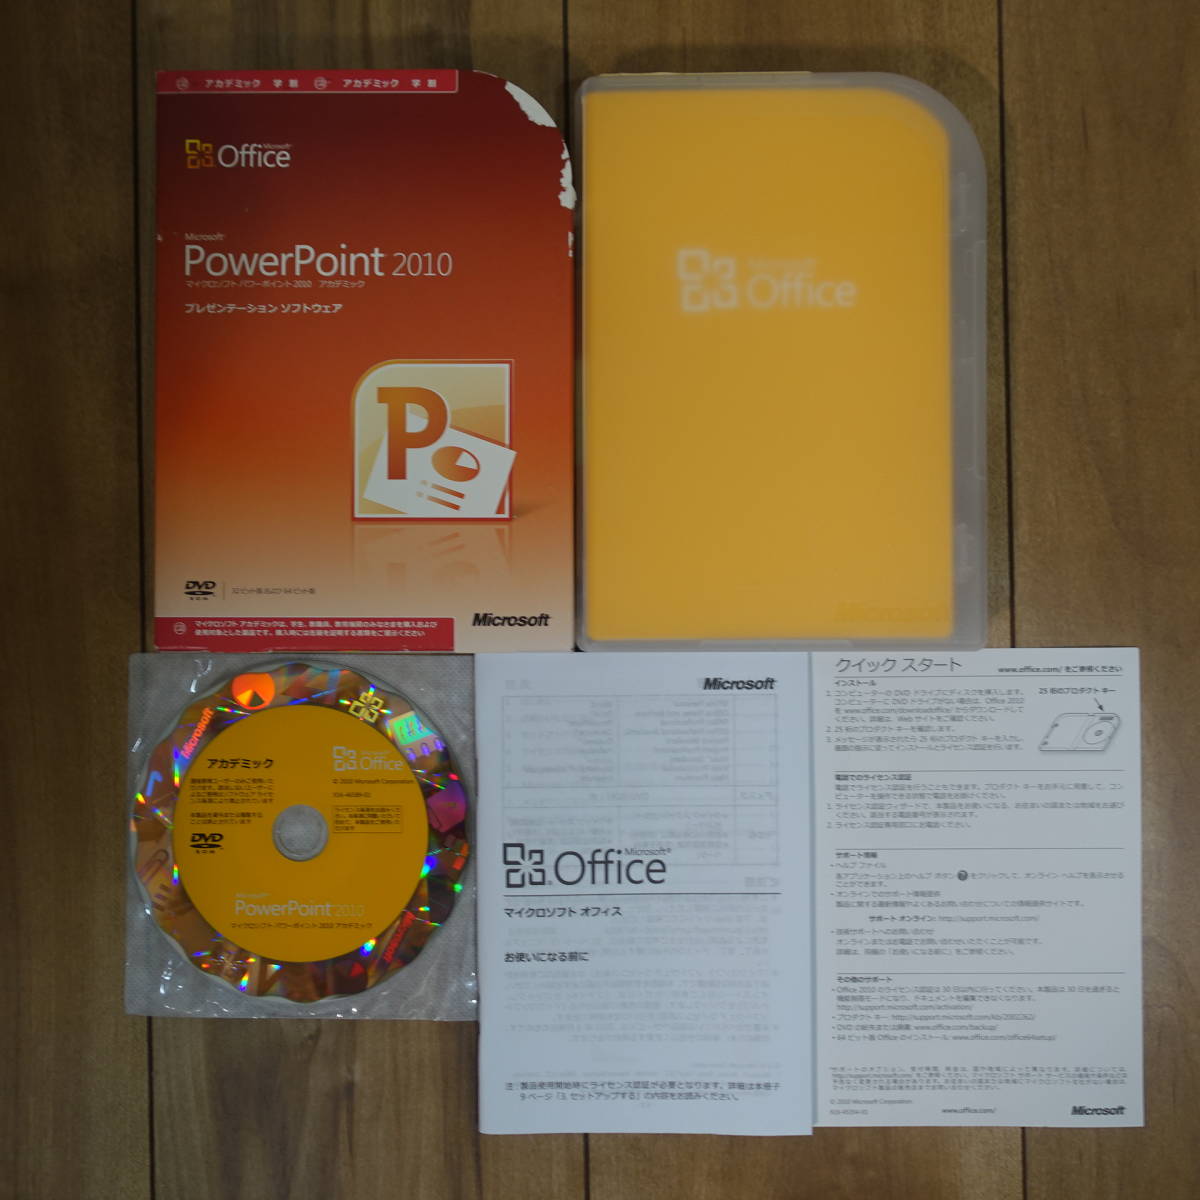 Microsoft PowerPoint 2010 general product version package version 